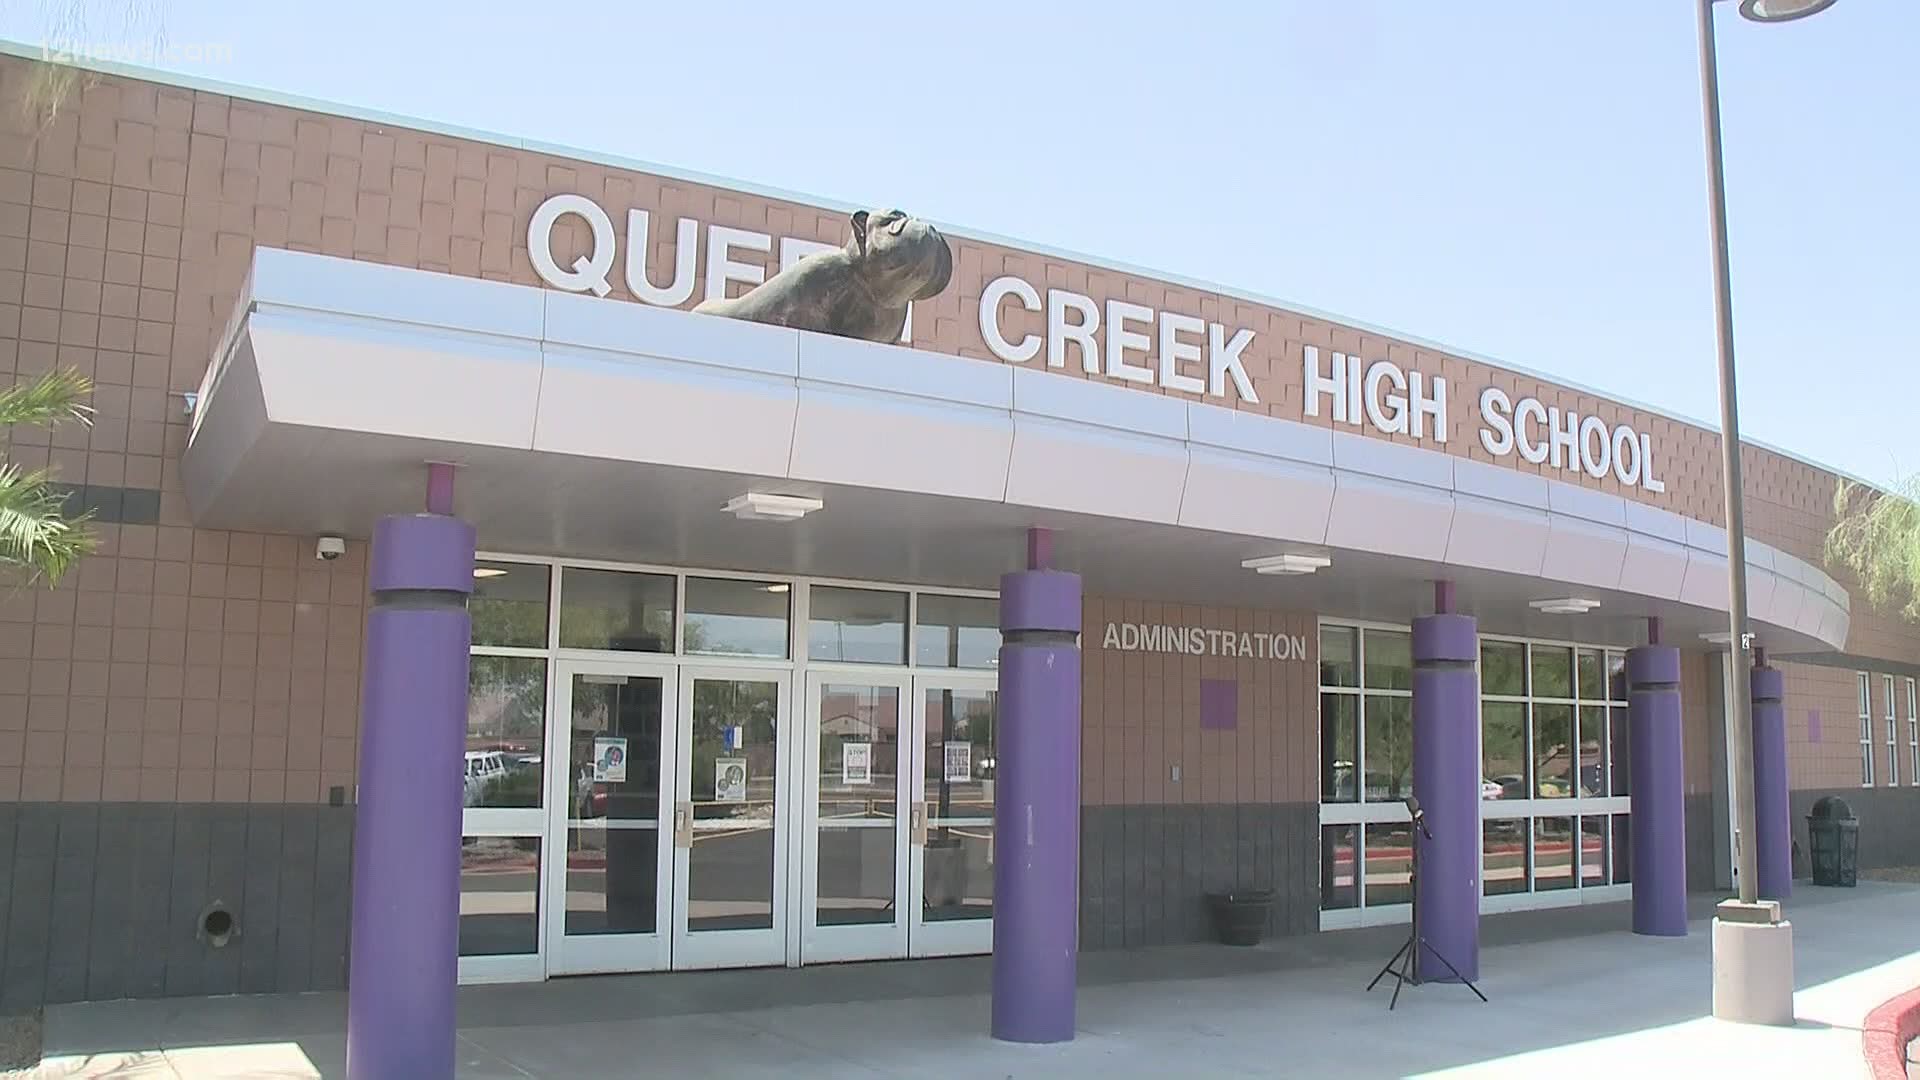 The Queen Creek School District made the decision to reopen even though Maricopa Co. hasn't met the state's COVID benchmarks. Students returned to in-person classes.